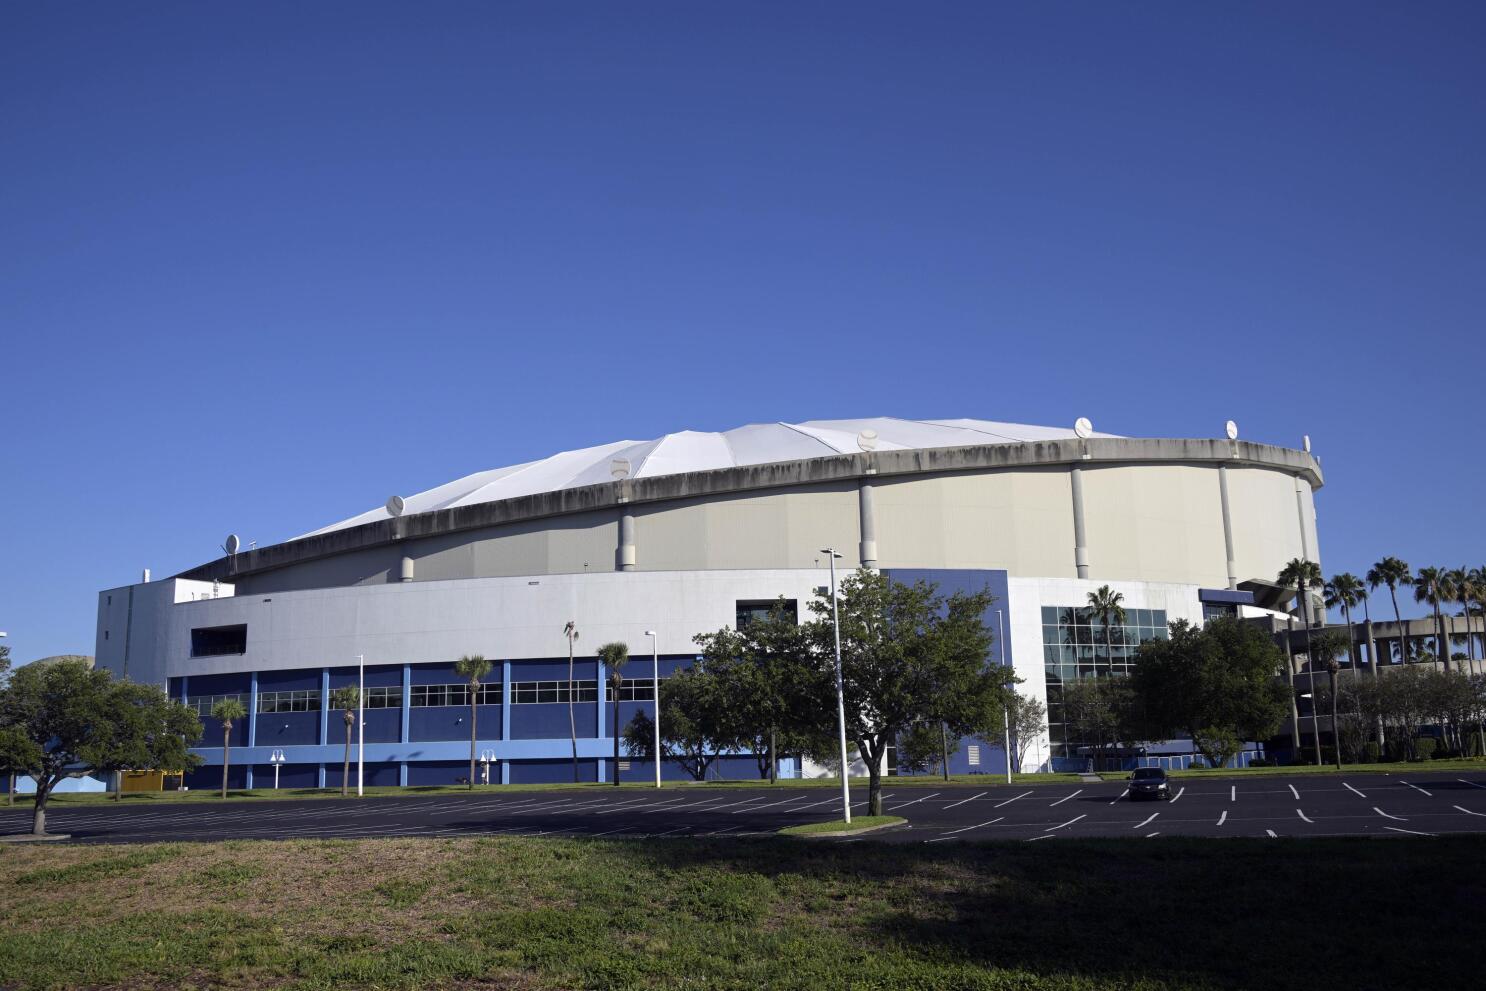 Tampa Bay Rays try to pull scam for new stadium in St. Petersburg